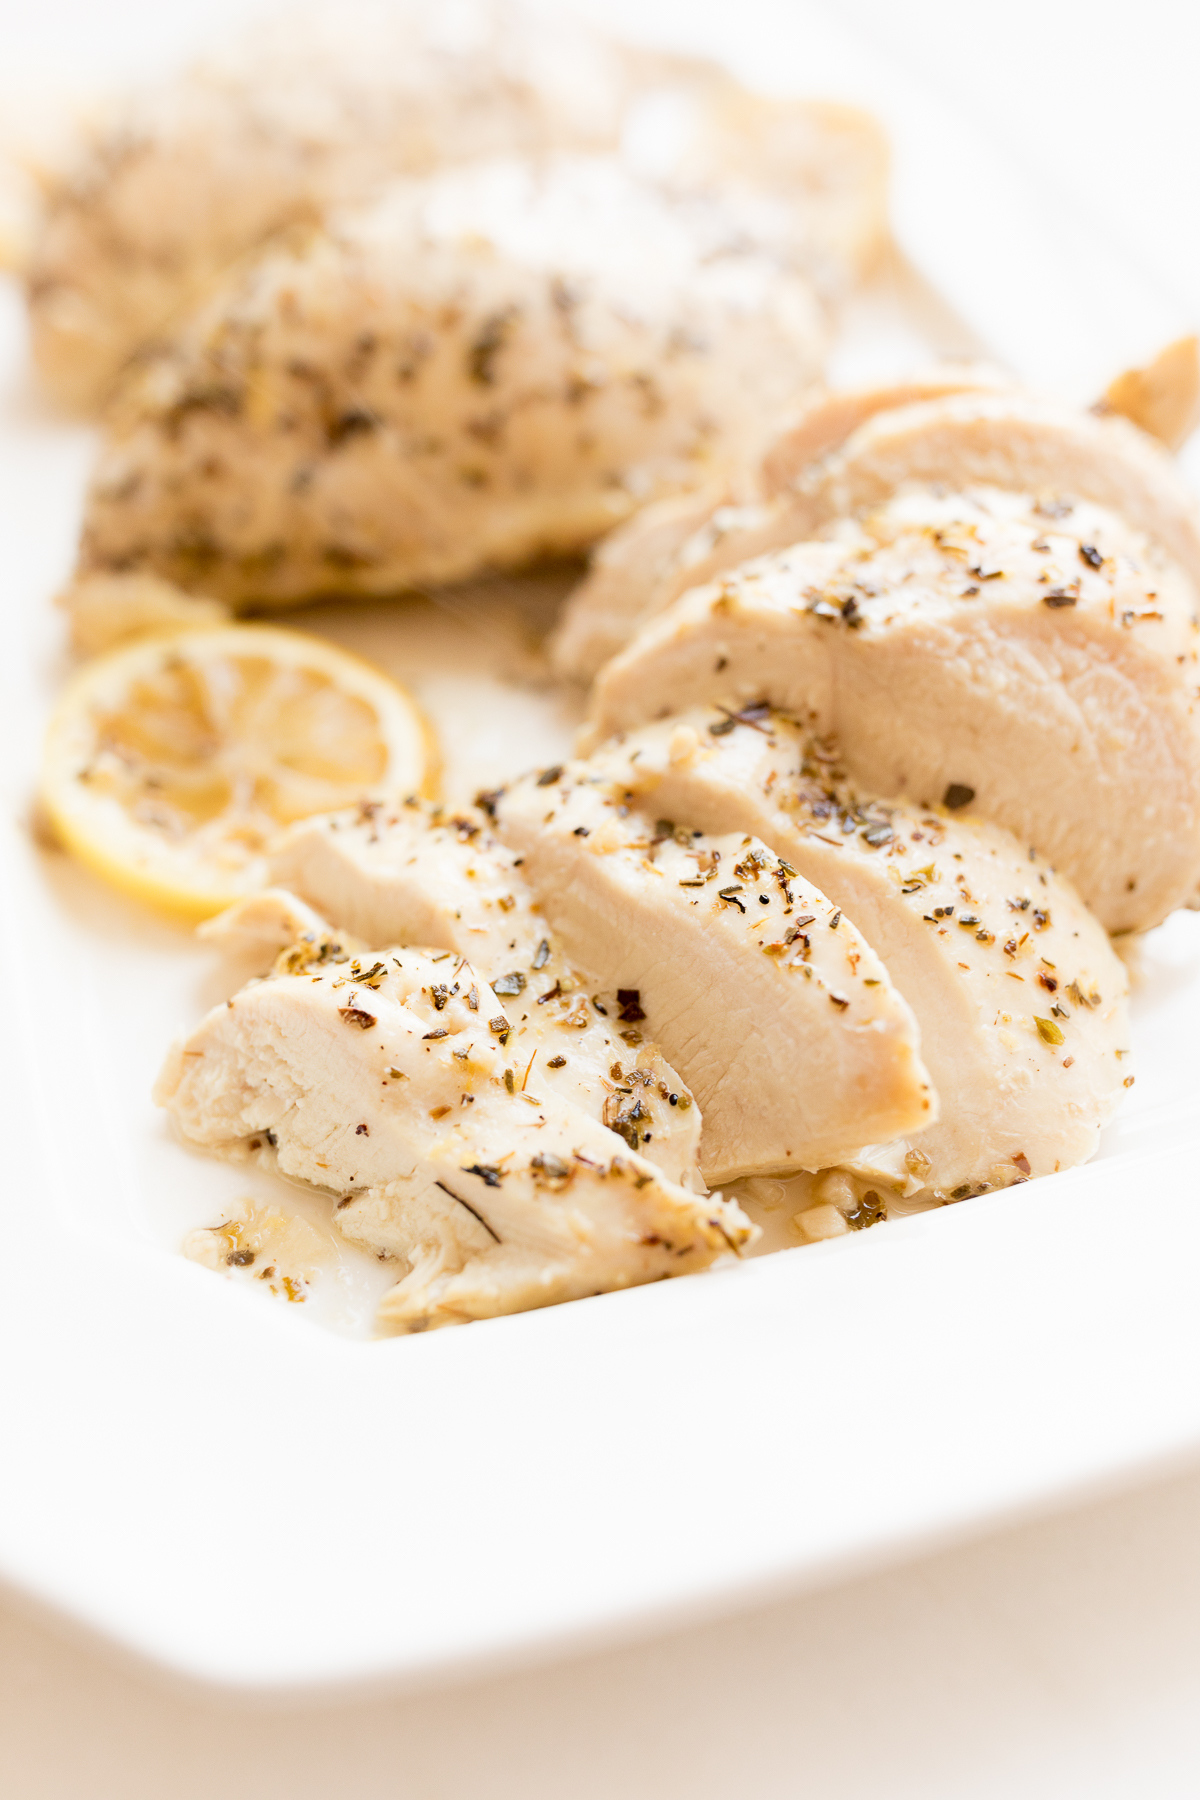 Sliced, herbed chicken breast served with lemon sauce on a white plate.